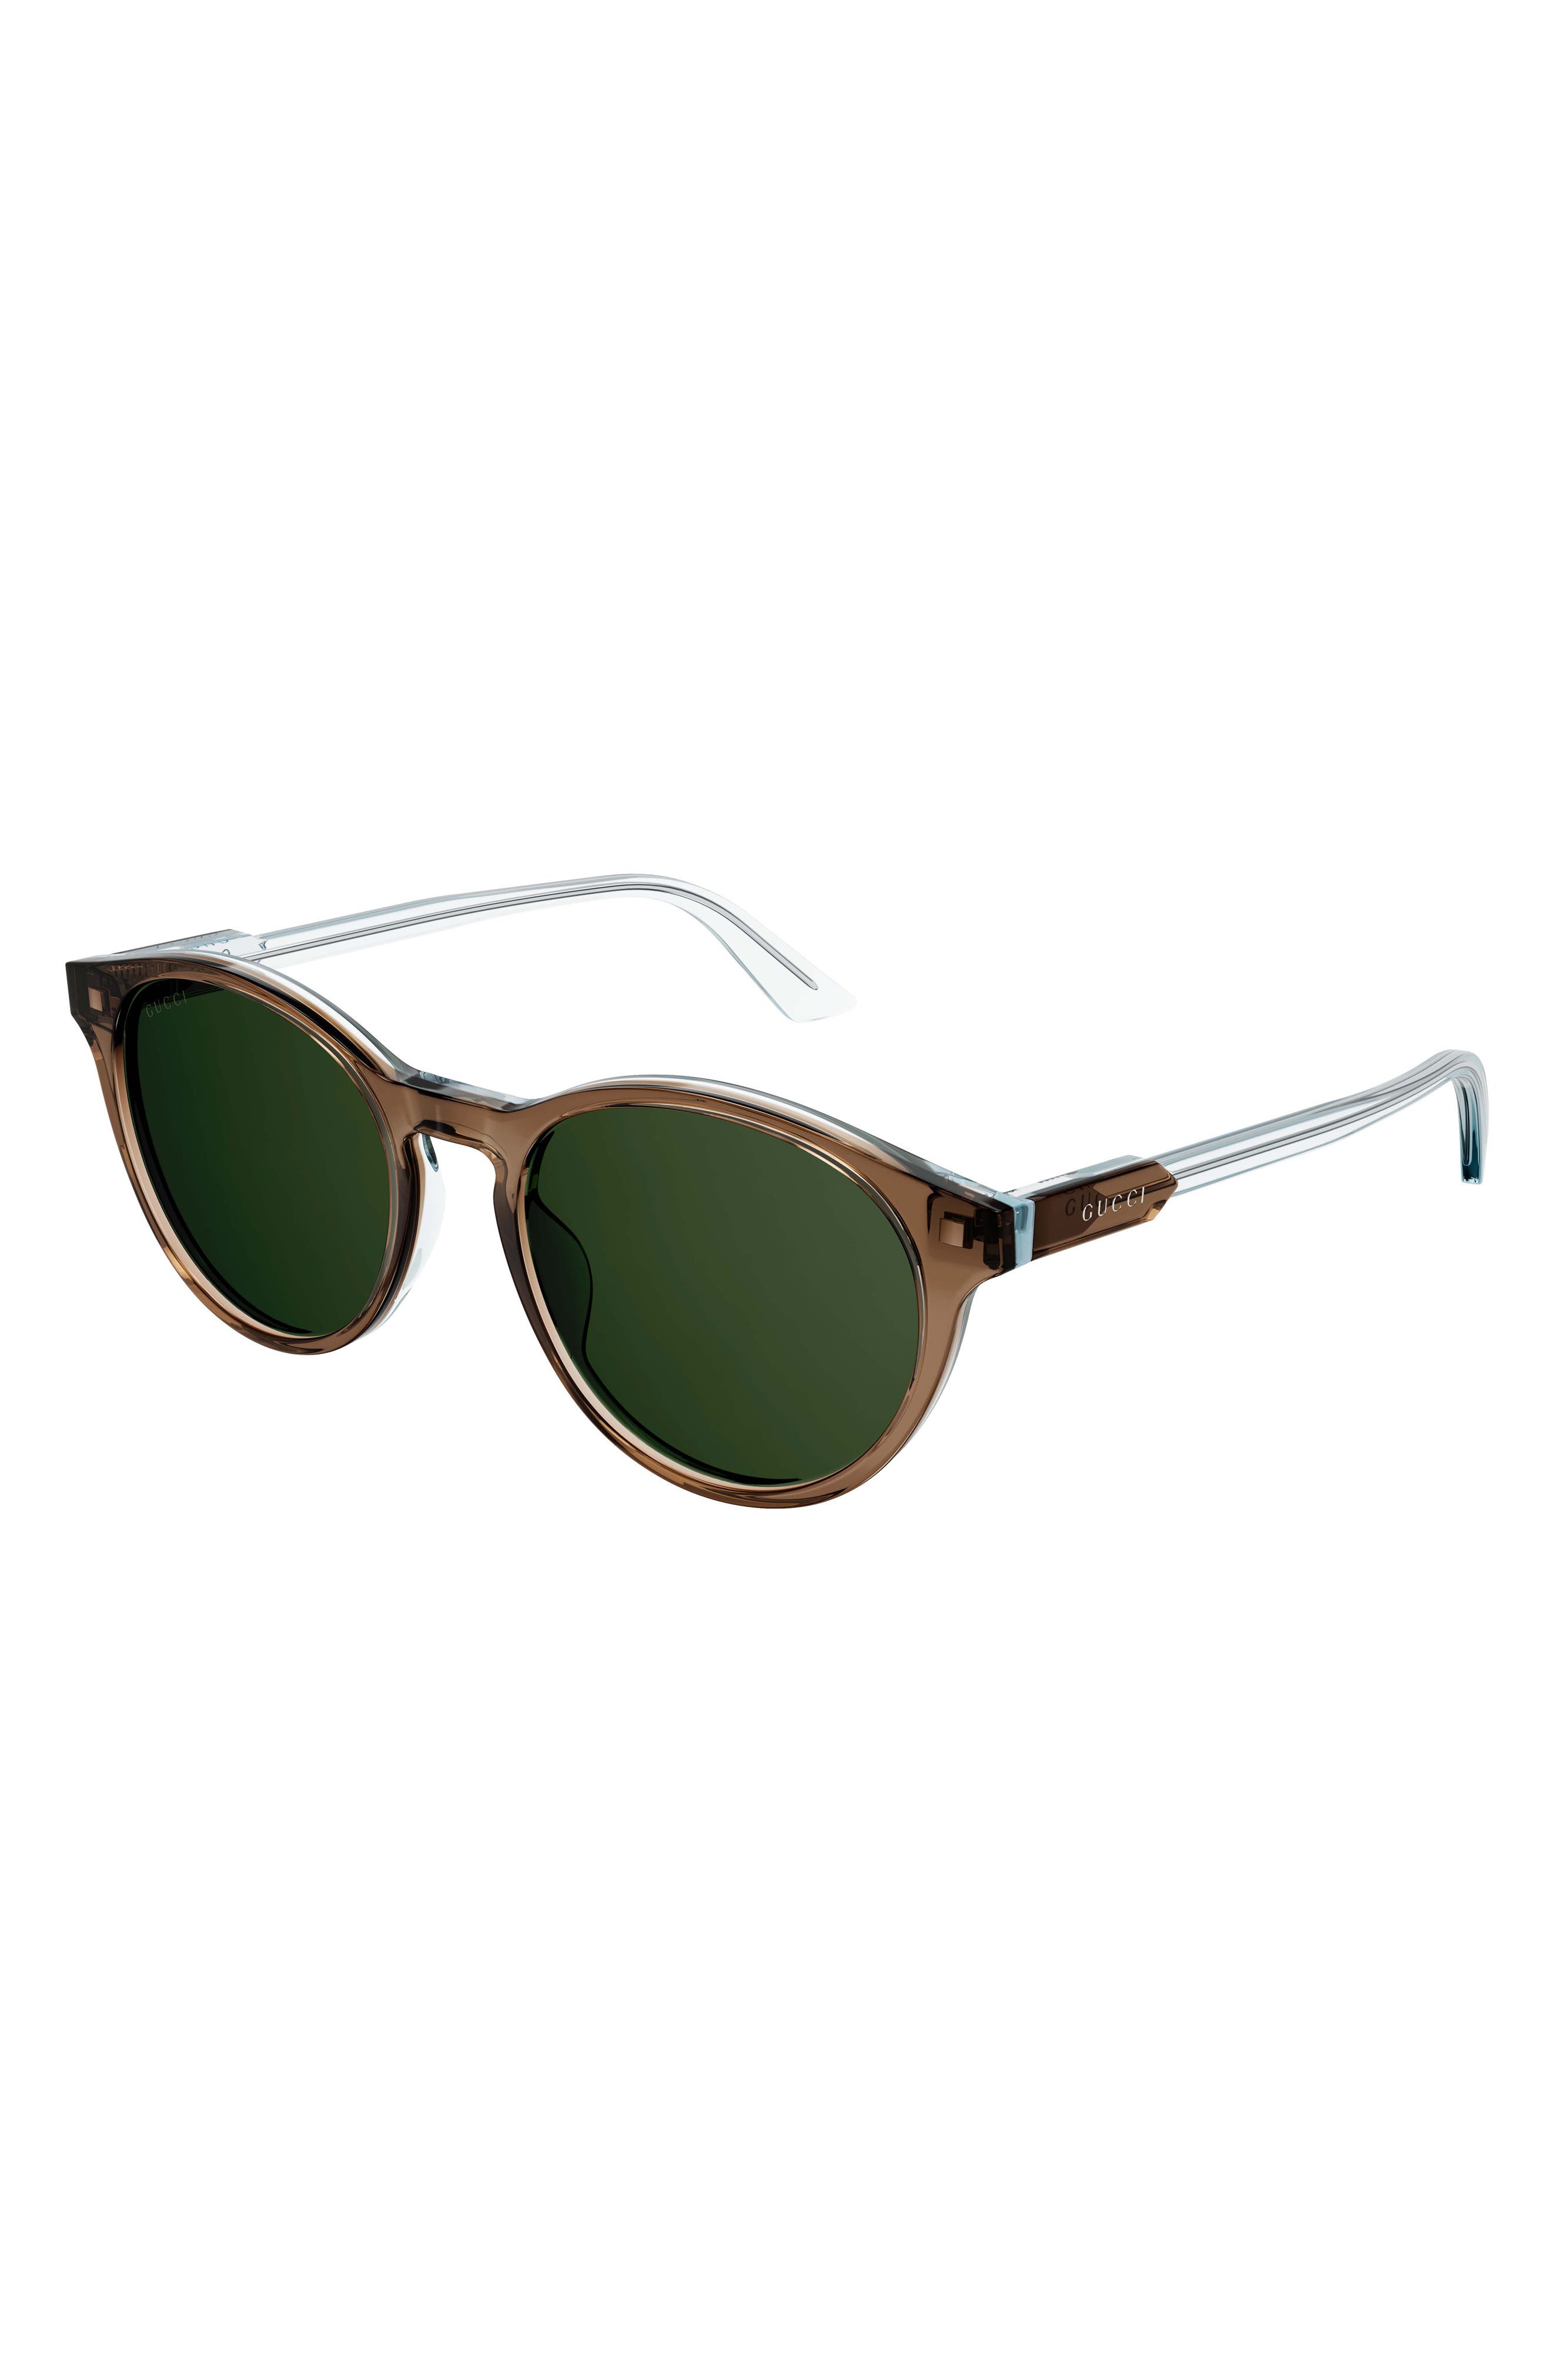 Gucci 52mm Round Sunglasses in Brown at Nordstrom